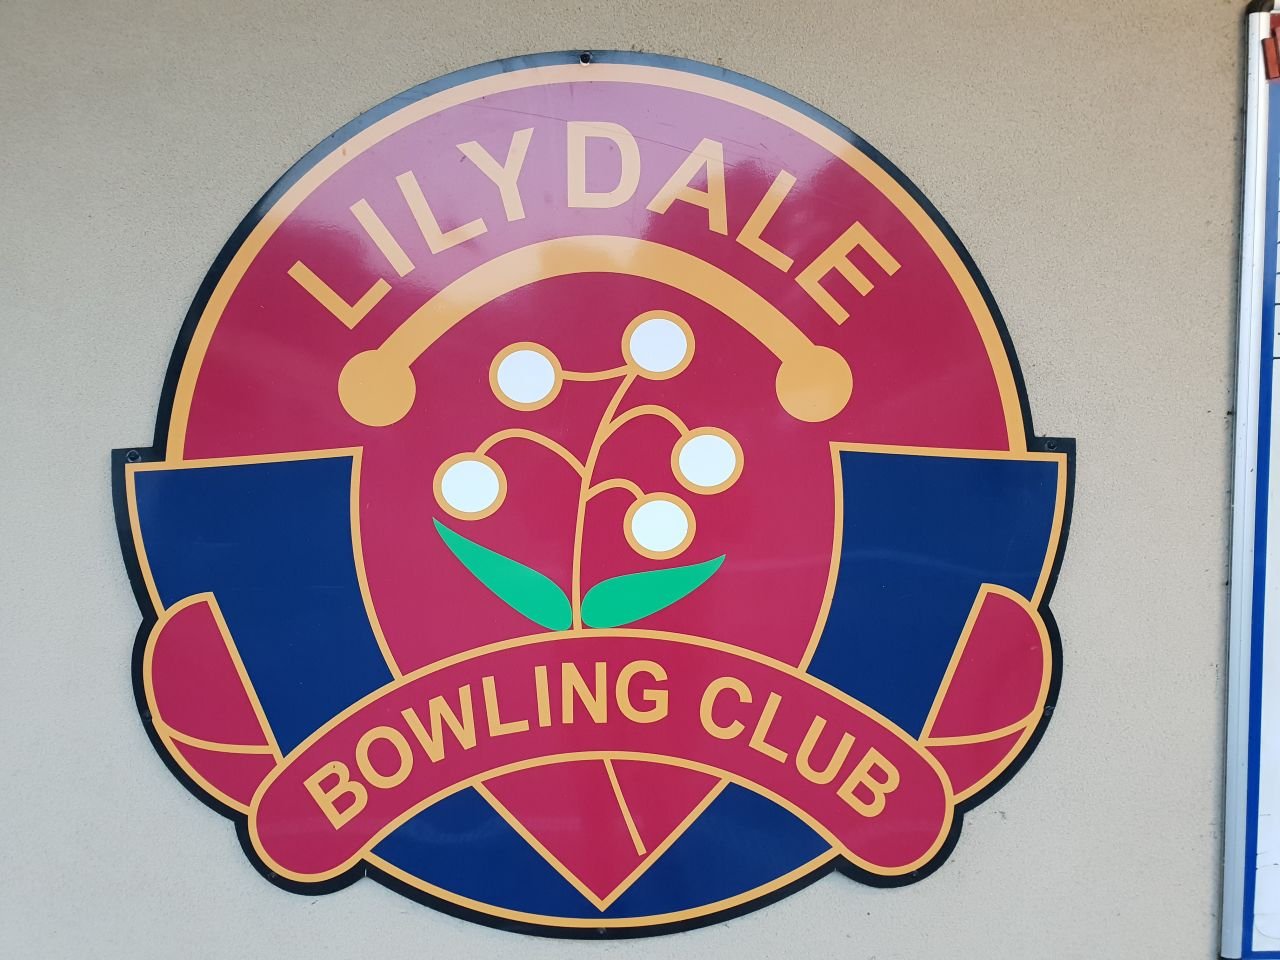 It was a great evening at the Lilydale Bowling Club.
Please refer to our 'Yarra Grapevine' Newsletter March - April edition  for more details.